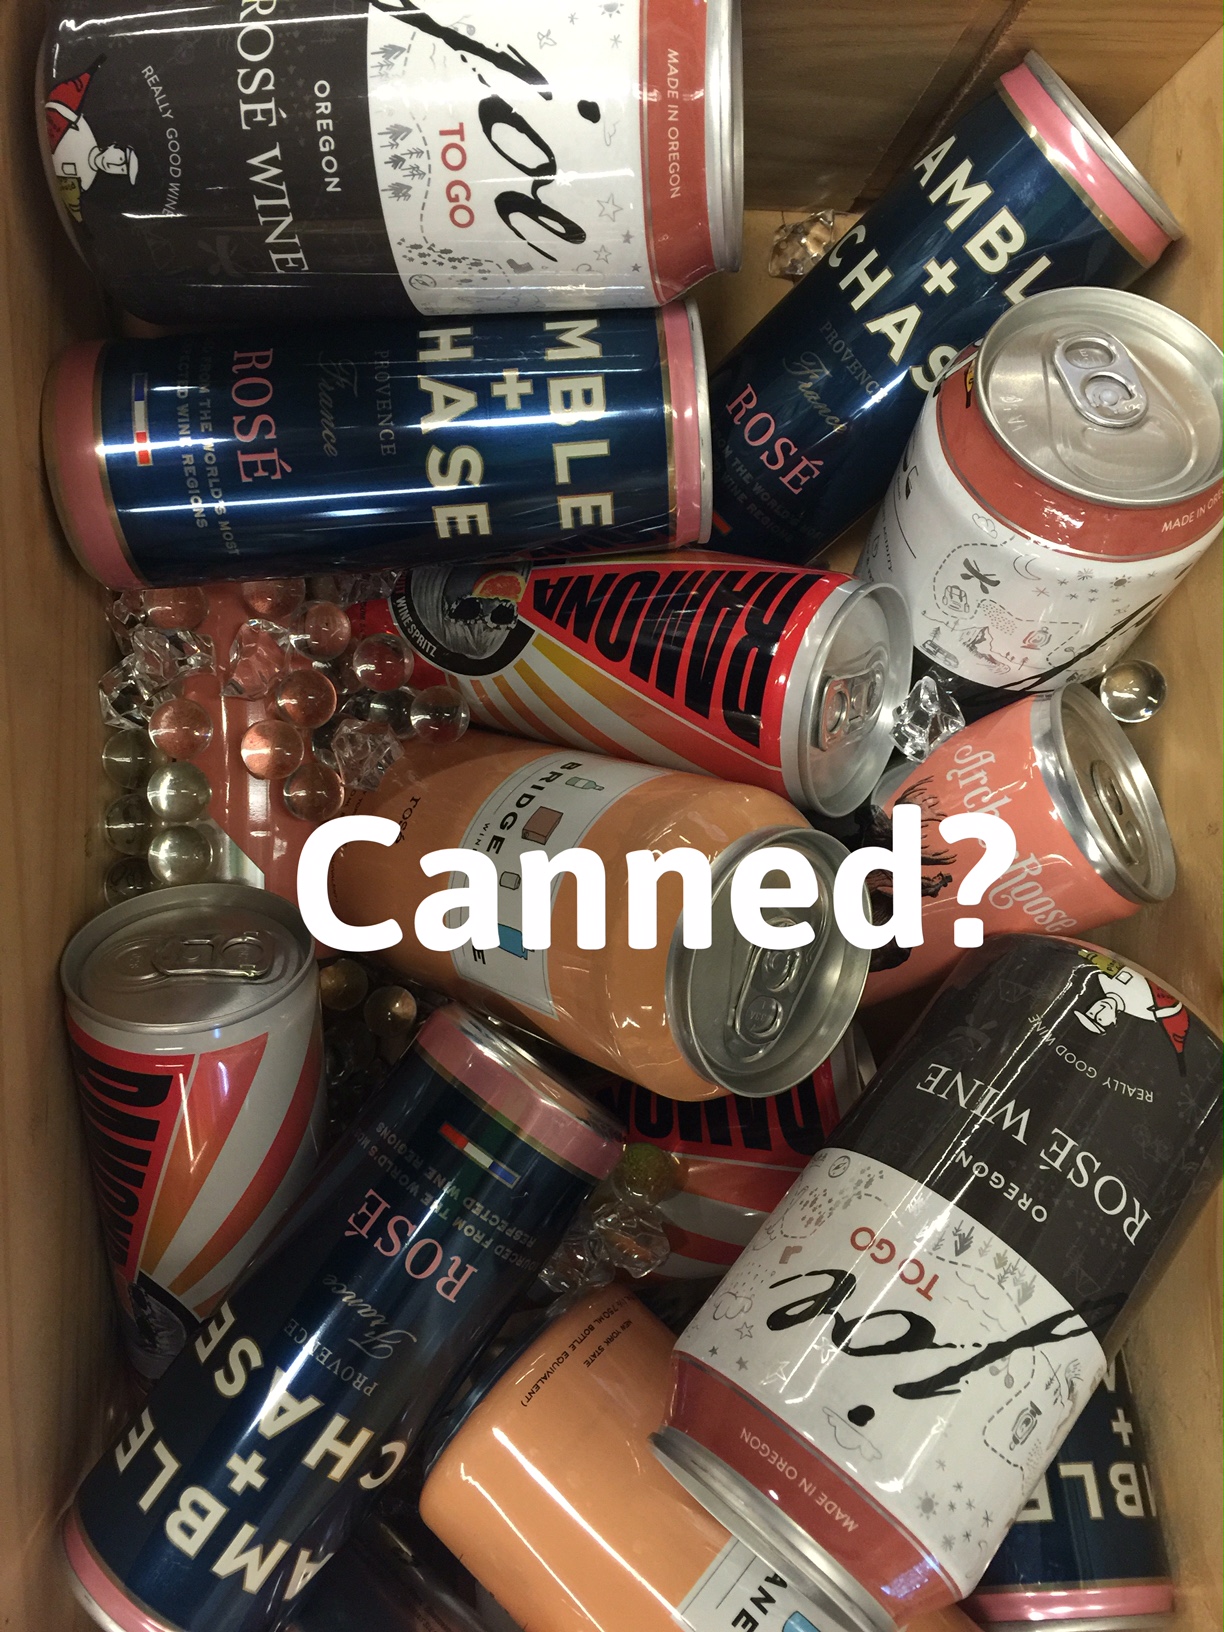 Canned